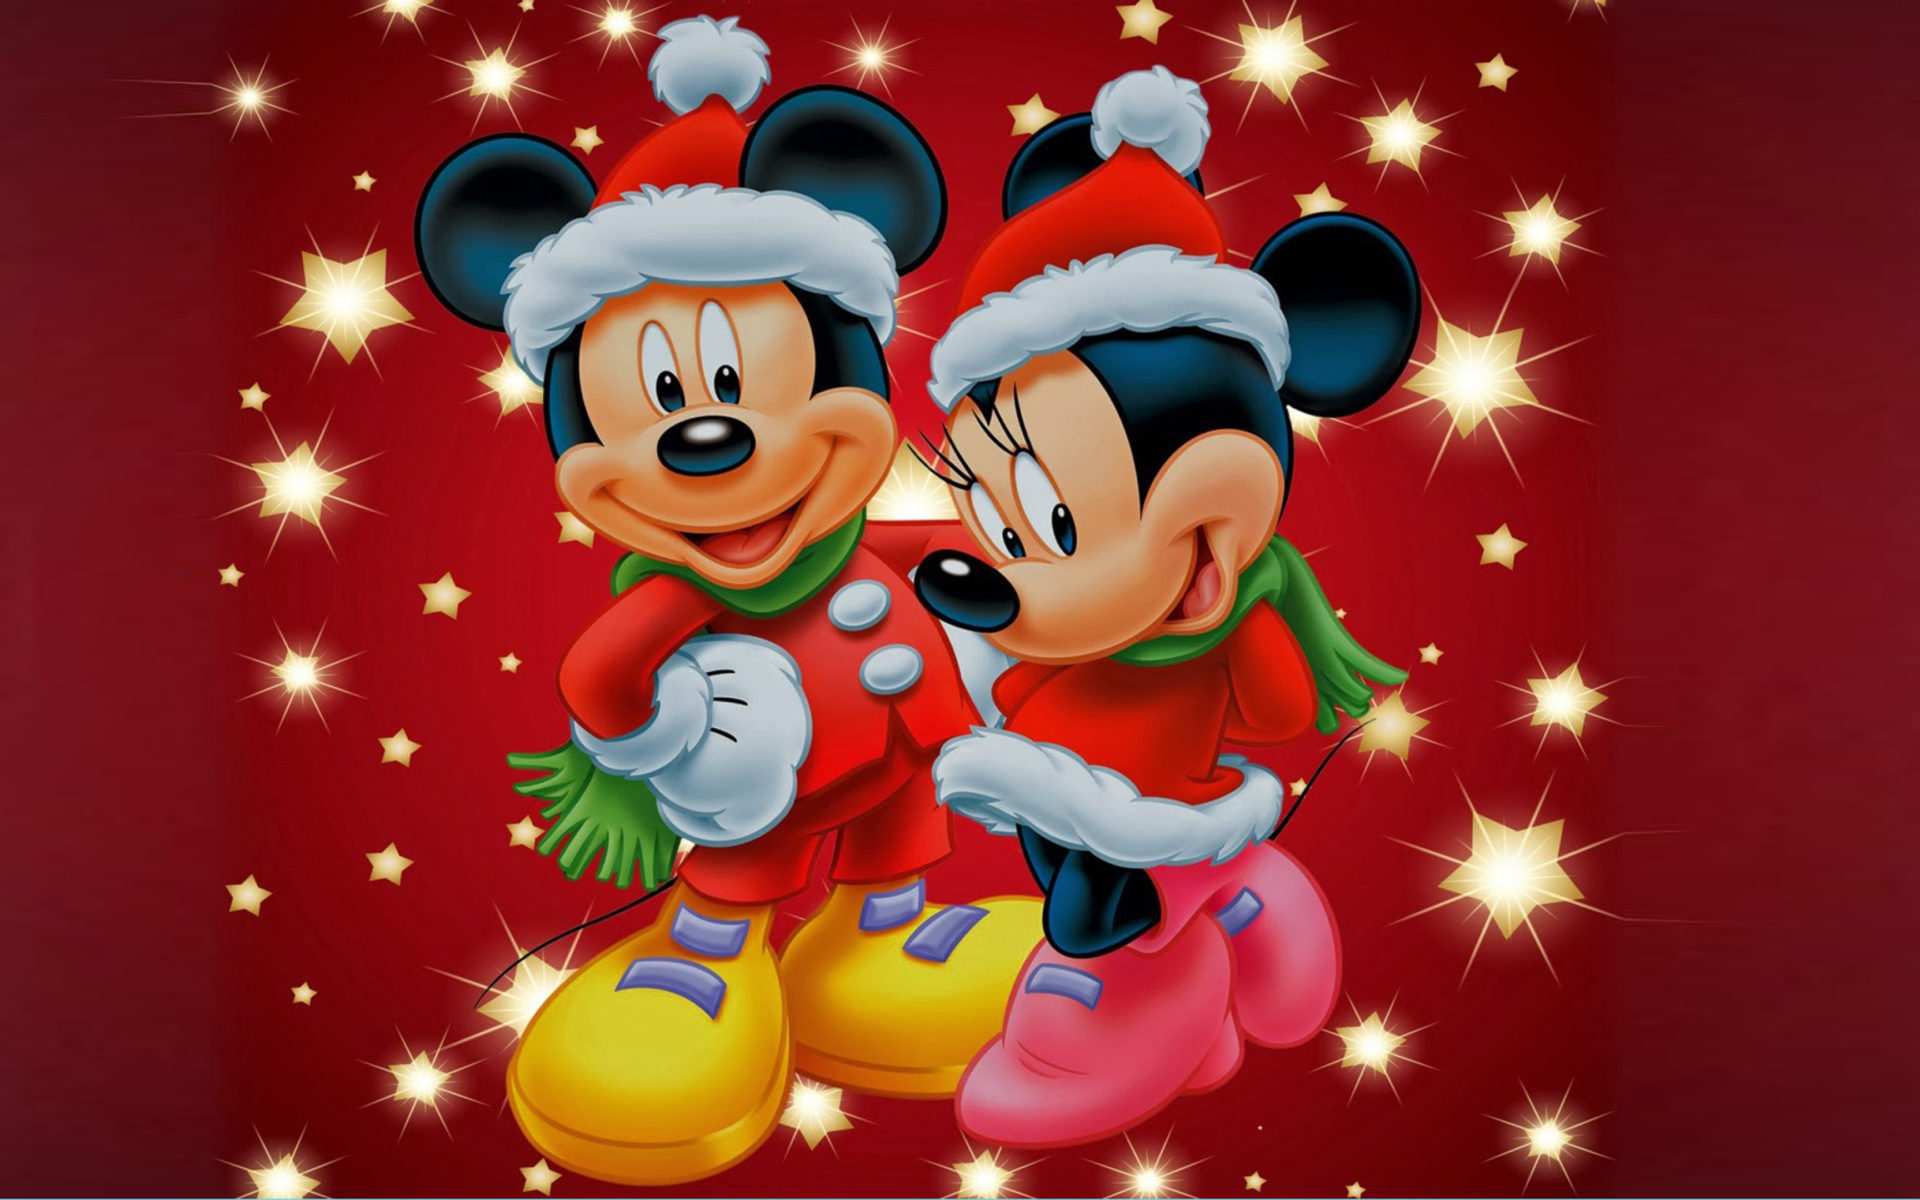 Mickey And Minnie Mouse Christmas Theme Desktop Wallpaper Hd For